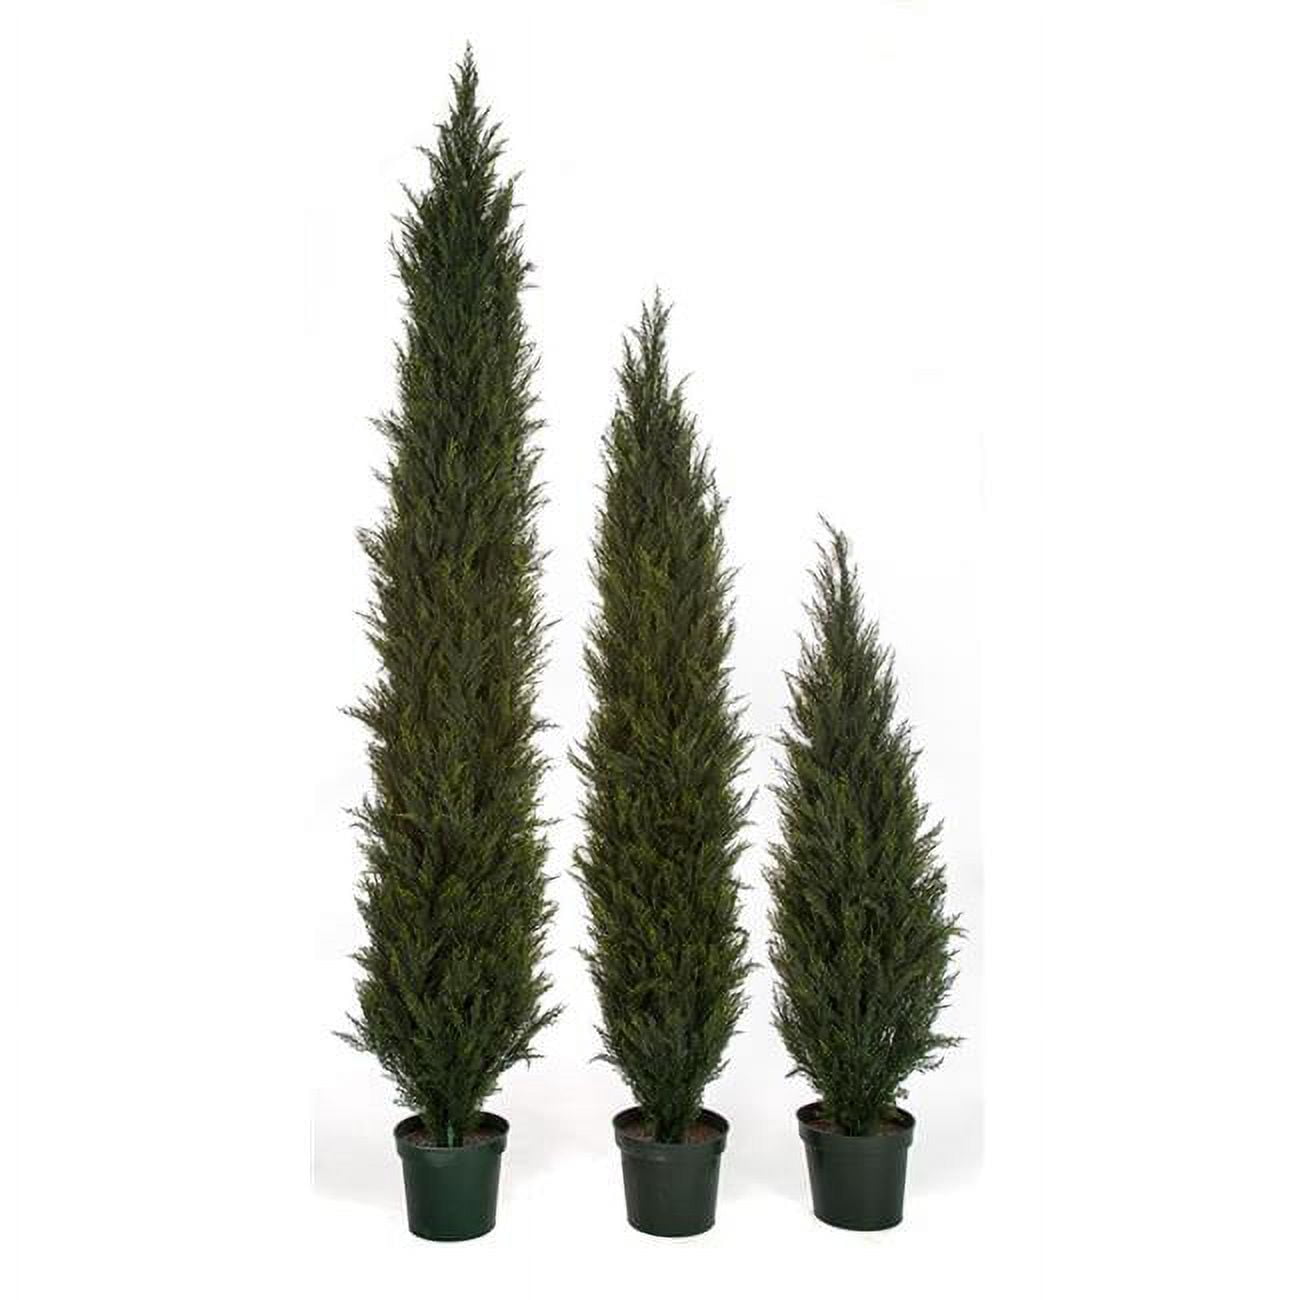 Picture of Autograph Foliages AUV-150008 8 ft. Outdoor UV Rated Cypress Tree, Green